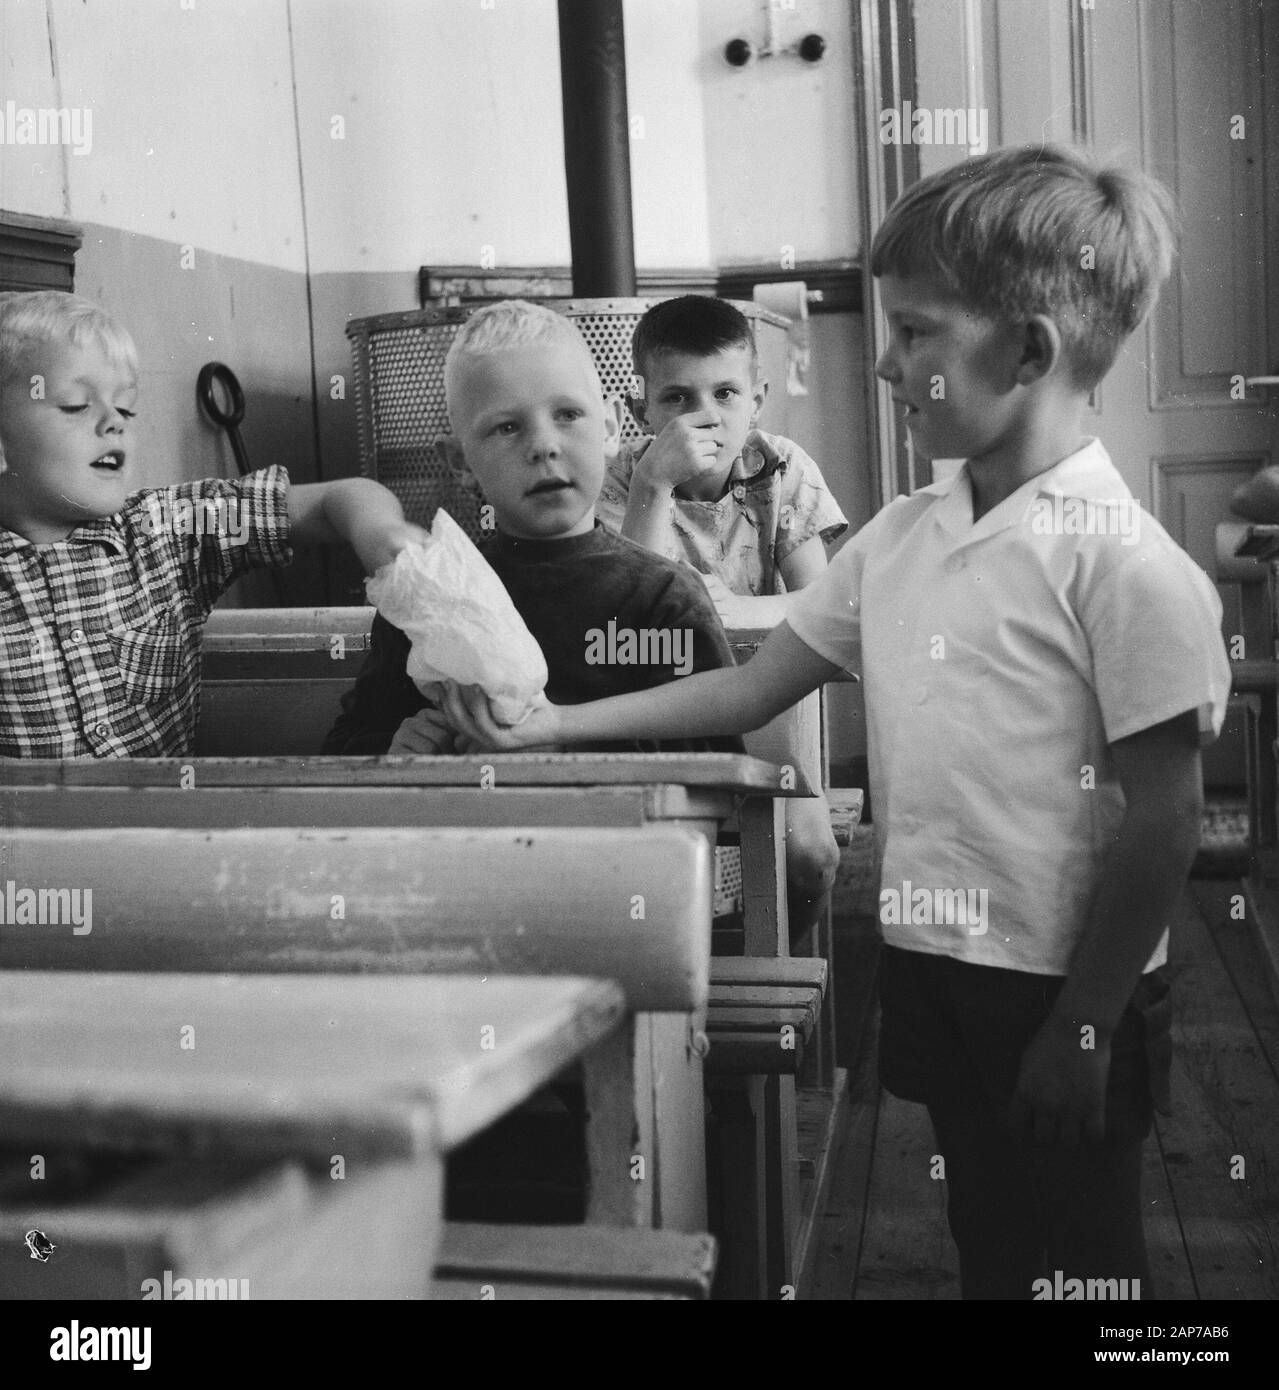 The first big school day, Tjalling to treat Date: August 22, 1960 Keywords: primary education, pupils, schools Stock Photo